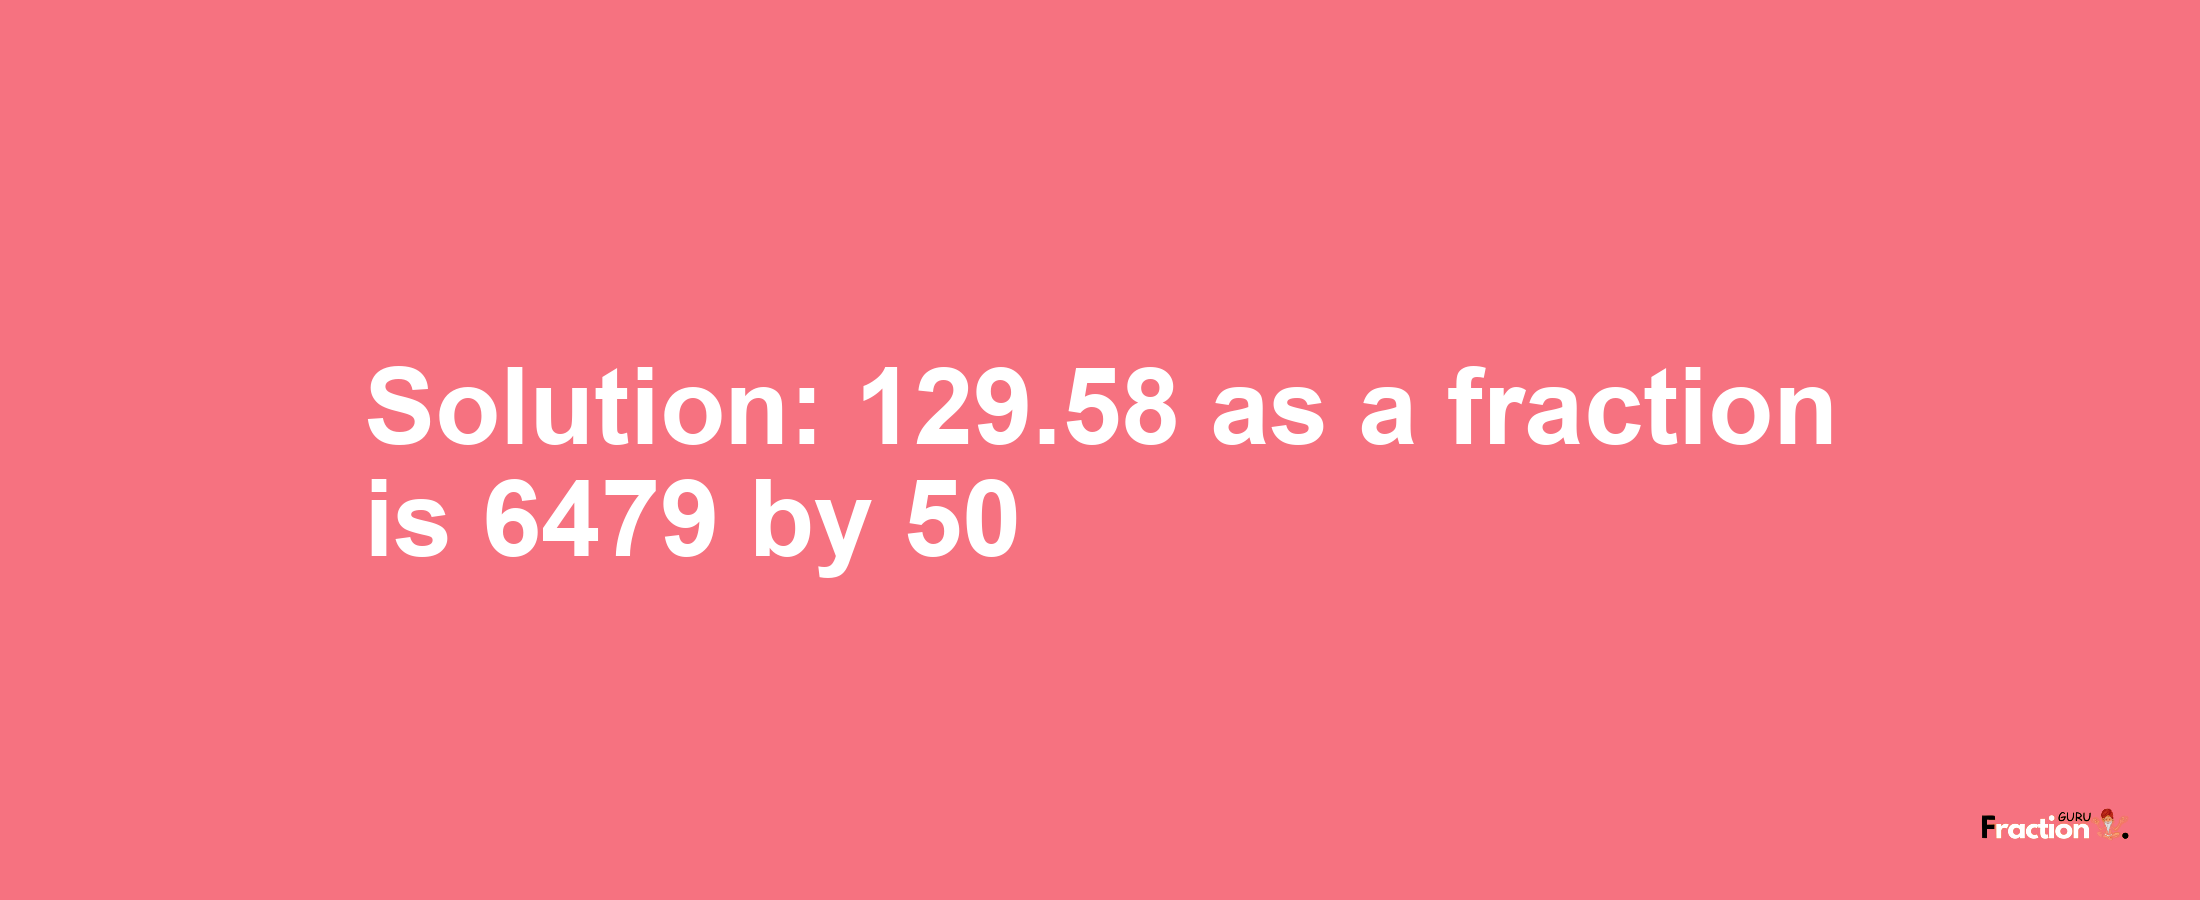 Solution:129.58 as a fraction is 6479/50